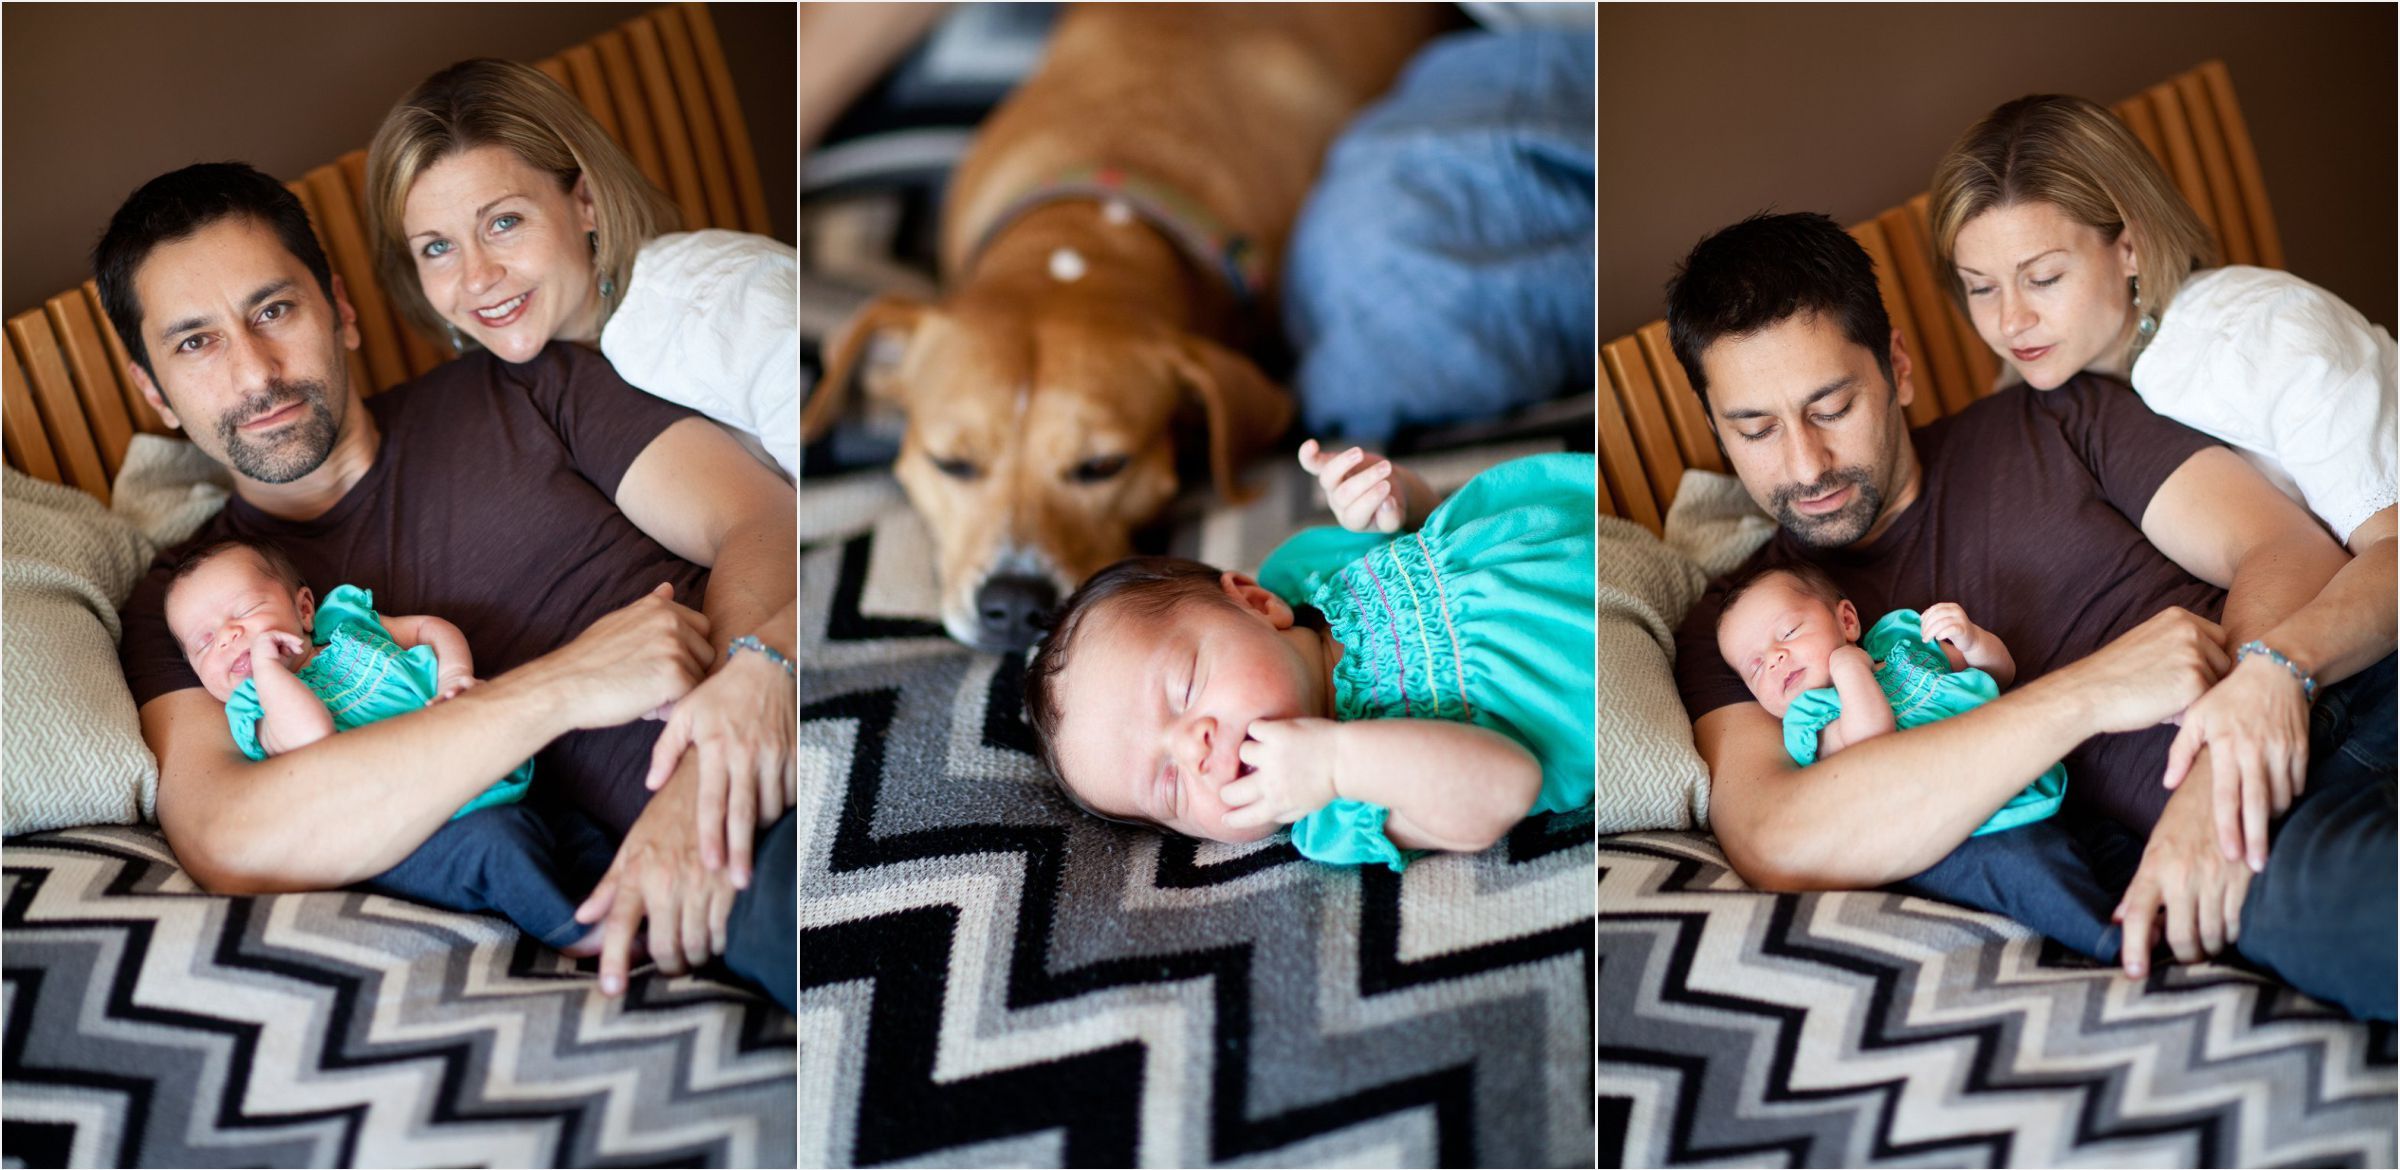 Dog-meets-baby-at-Denver-home-location-photoshoot-0003